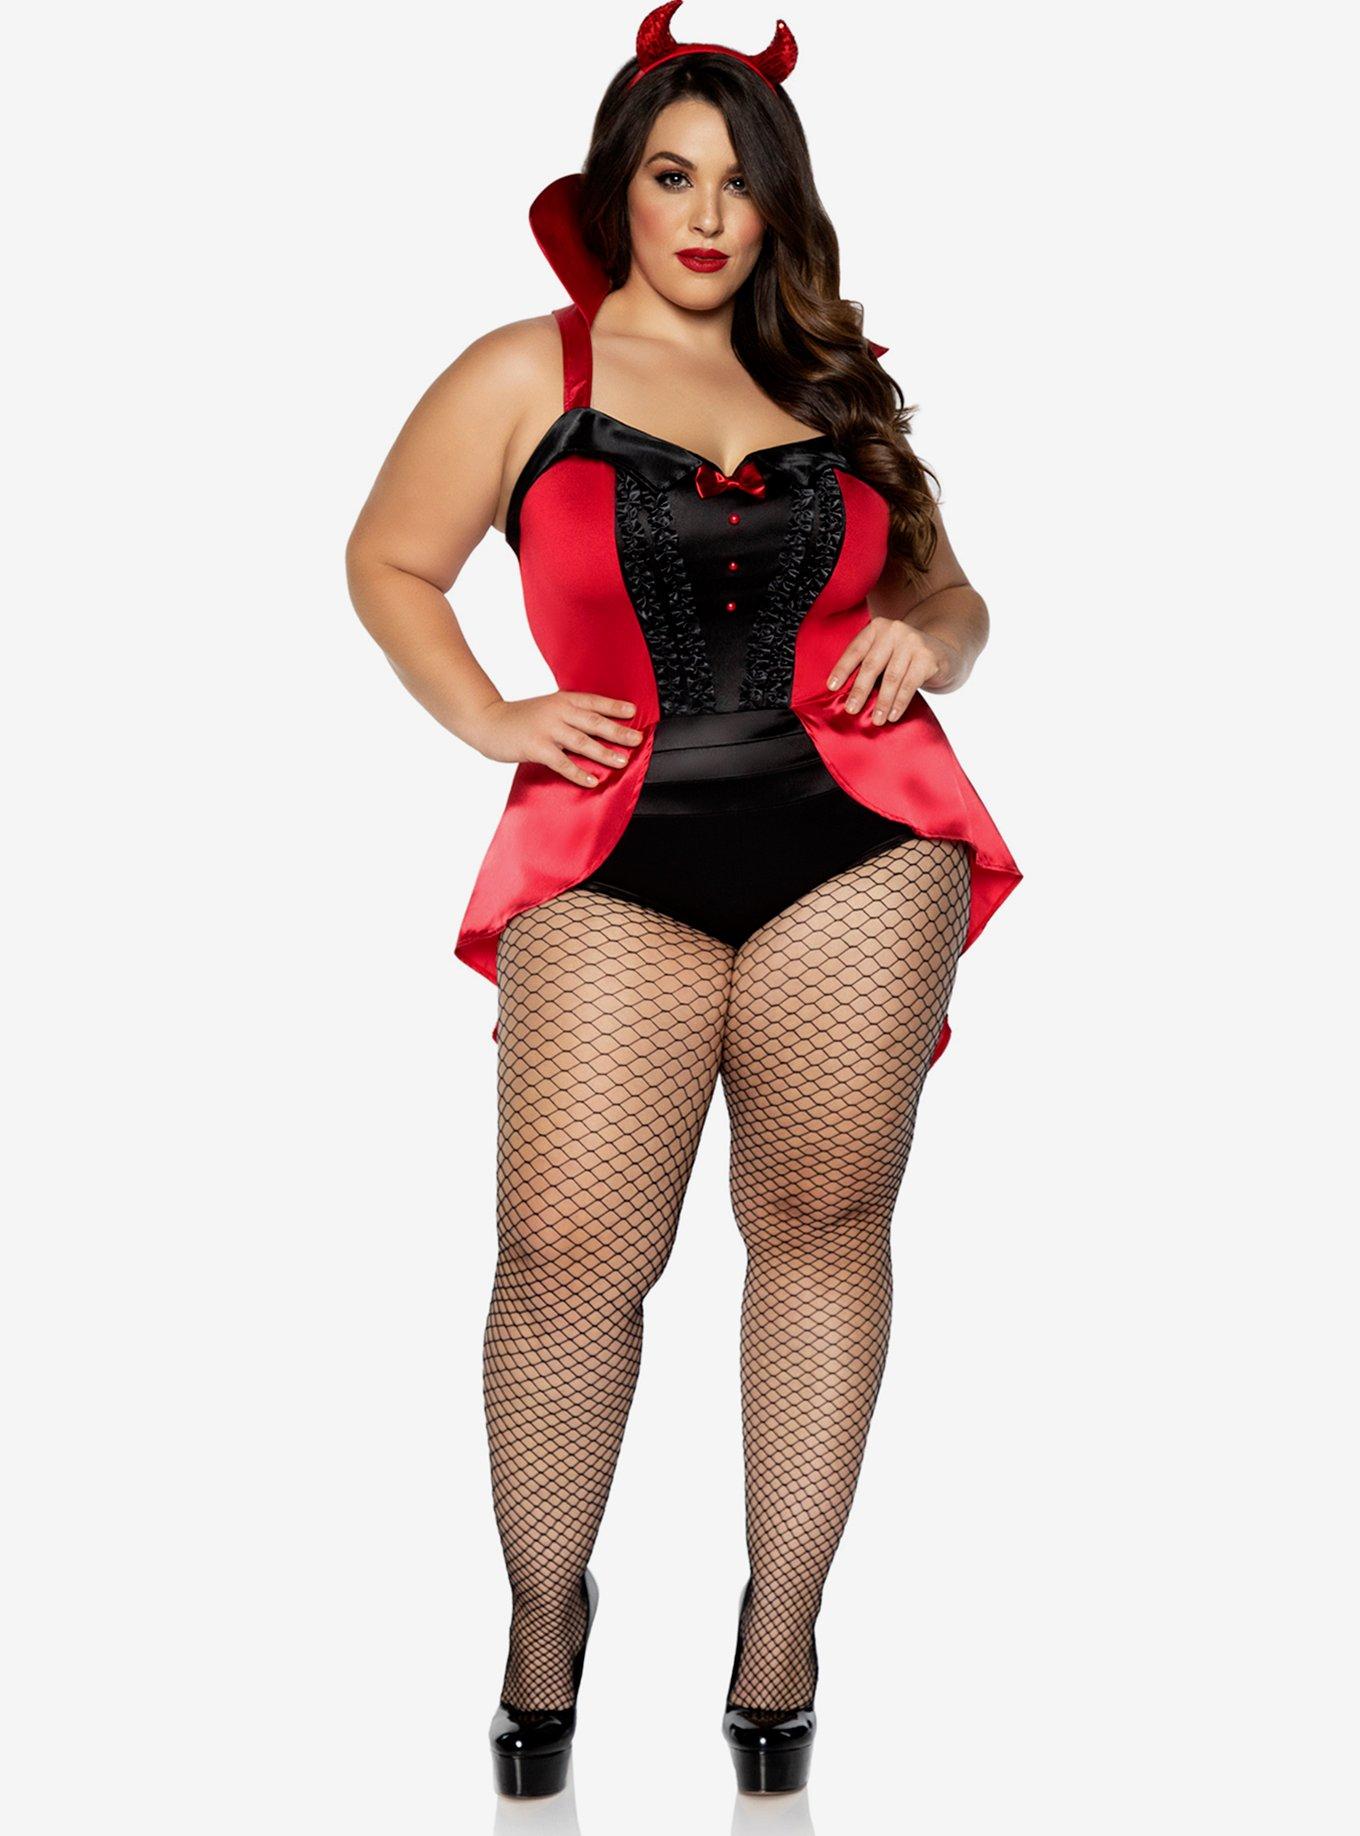 Plus SIZE Star Tights With Silver or Gold Pattern, S-4XL Sizes, Chrismas  Outfit, Burlesque Halloween Costume -  Canada